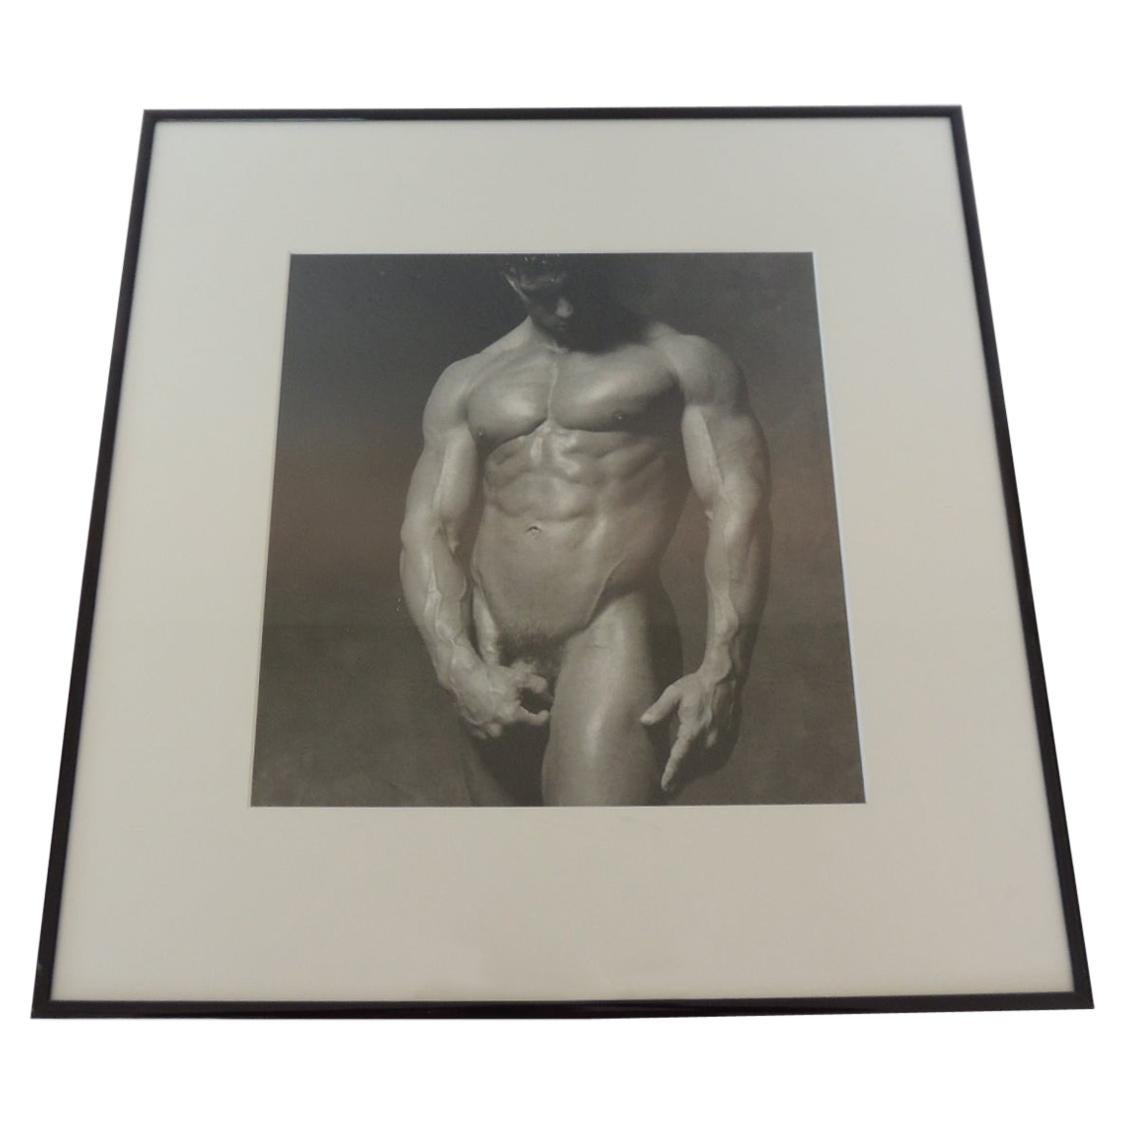 Nude Black and White Abstract Photograph of Male